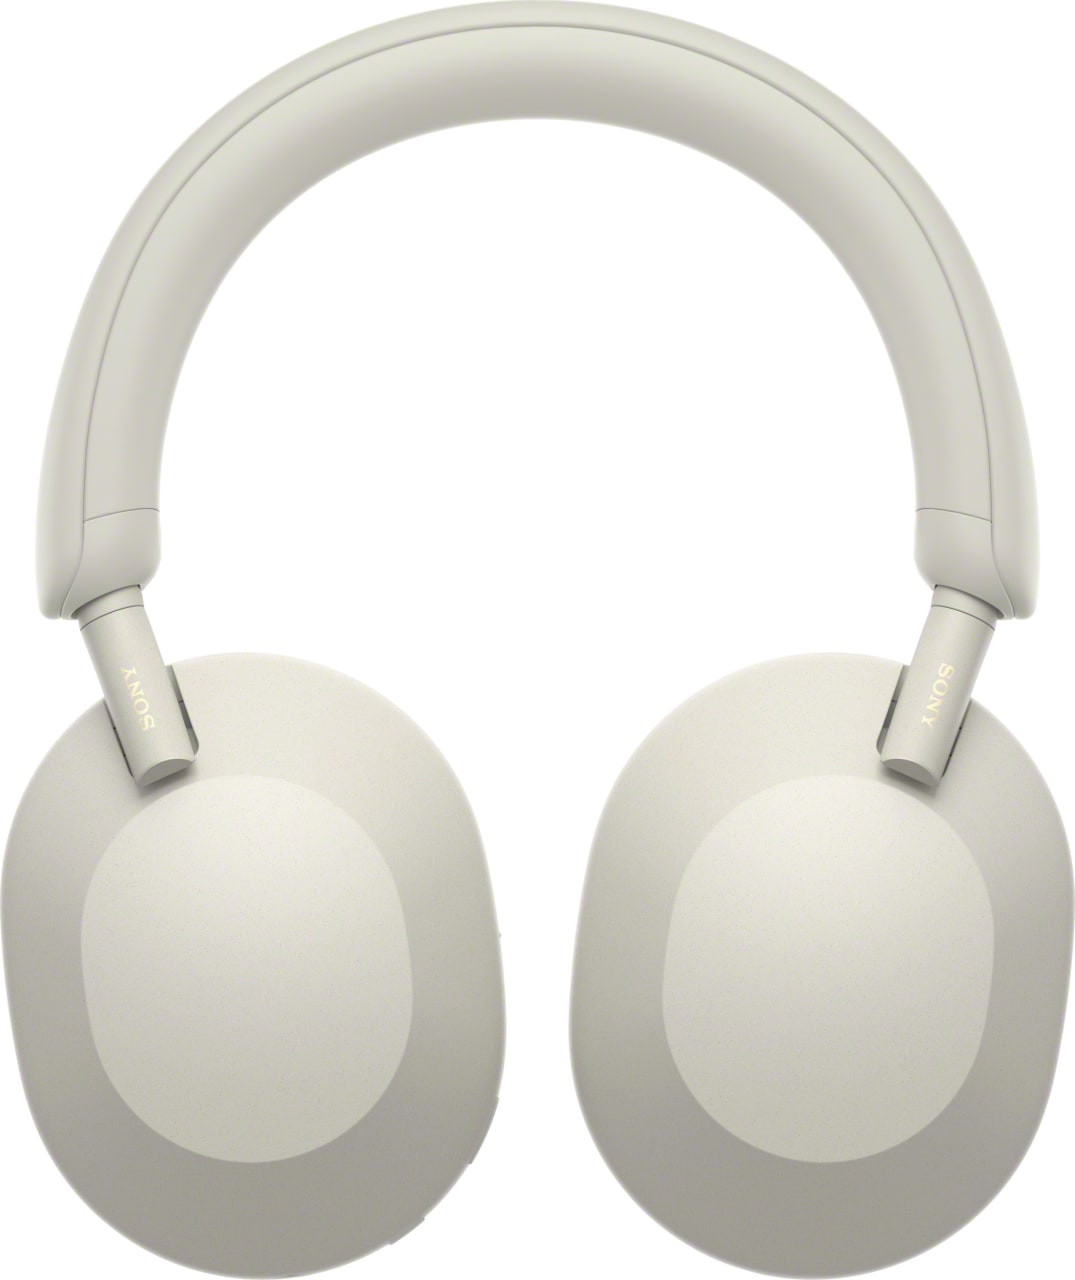 Silver Sony WH-1000 XM5 Noise-cancelling Over-ear Bluetooth headphones.3